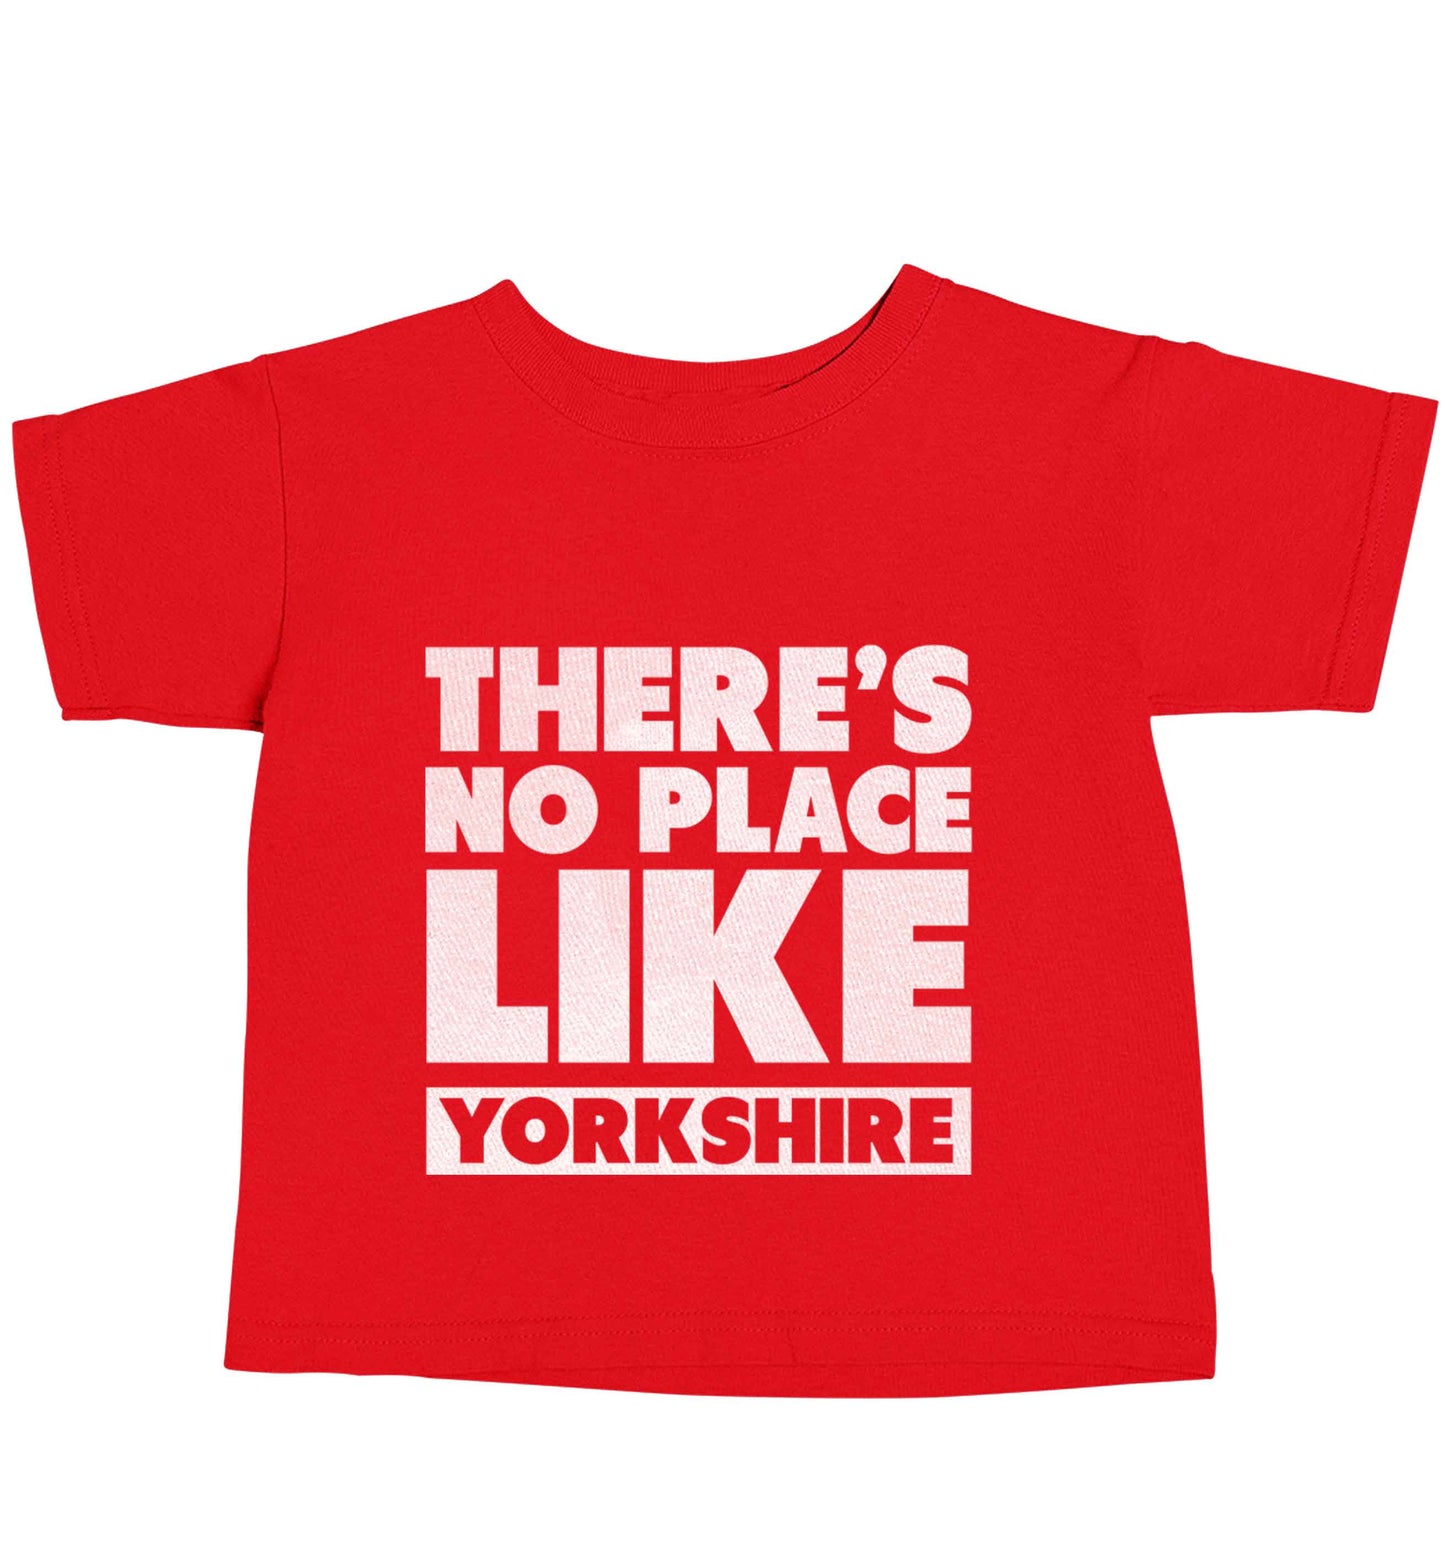 There's no place like Yorkshire red baby toddler Tshirt 2 Years